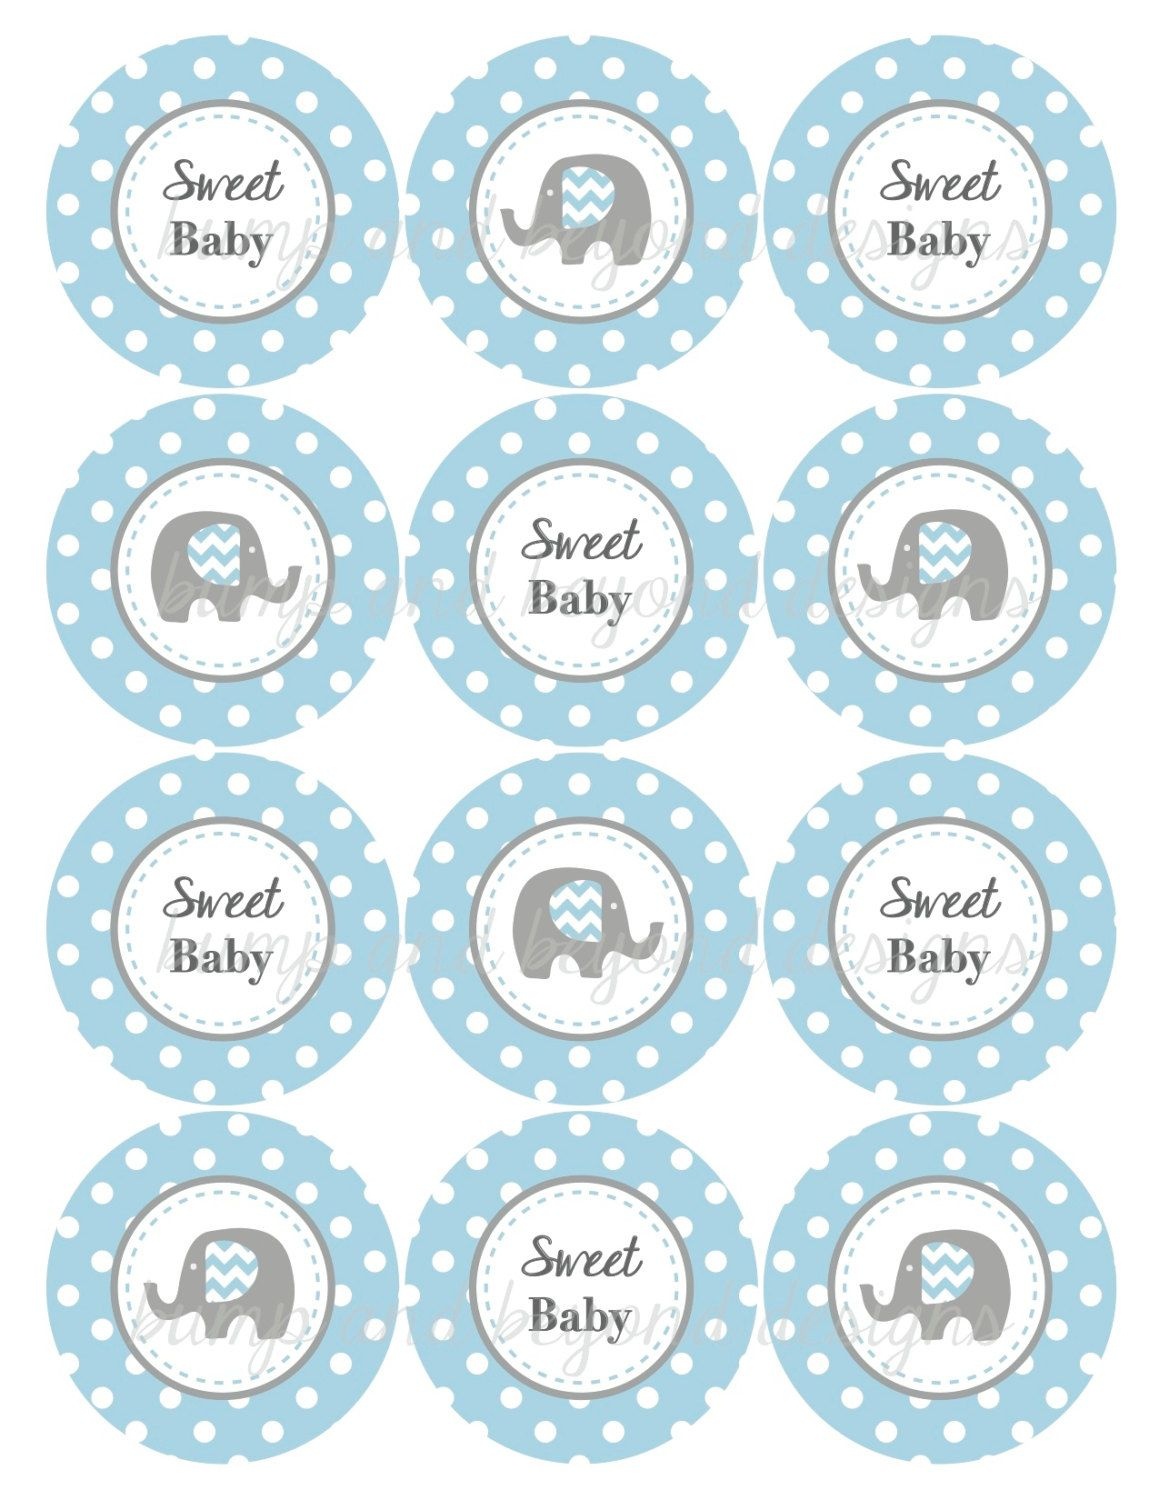 Remarkable Ideas Cupcake Toppers Baby Shower Capricious Decorations - Free Printable Elephant Baby Shower